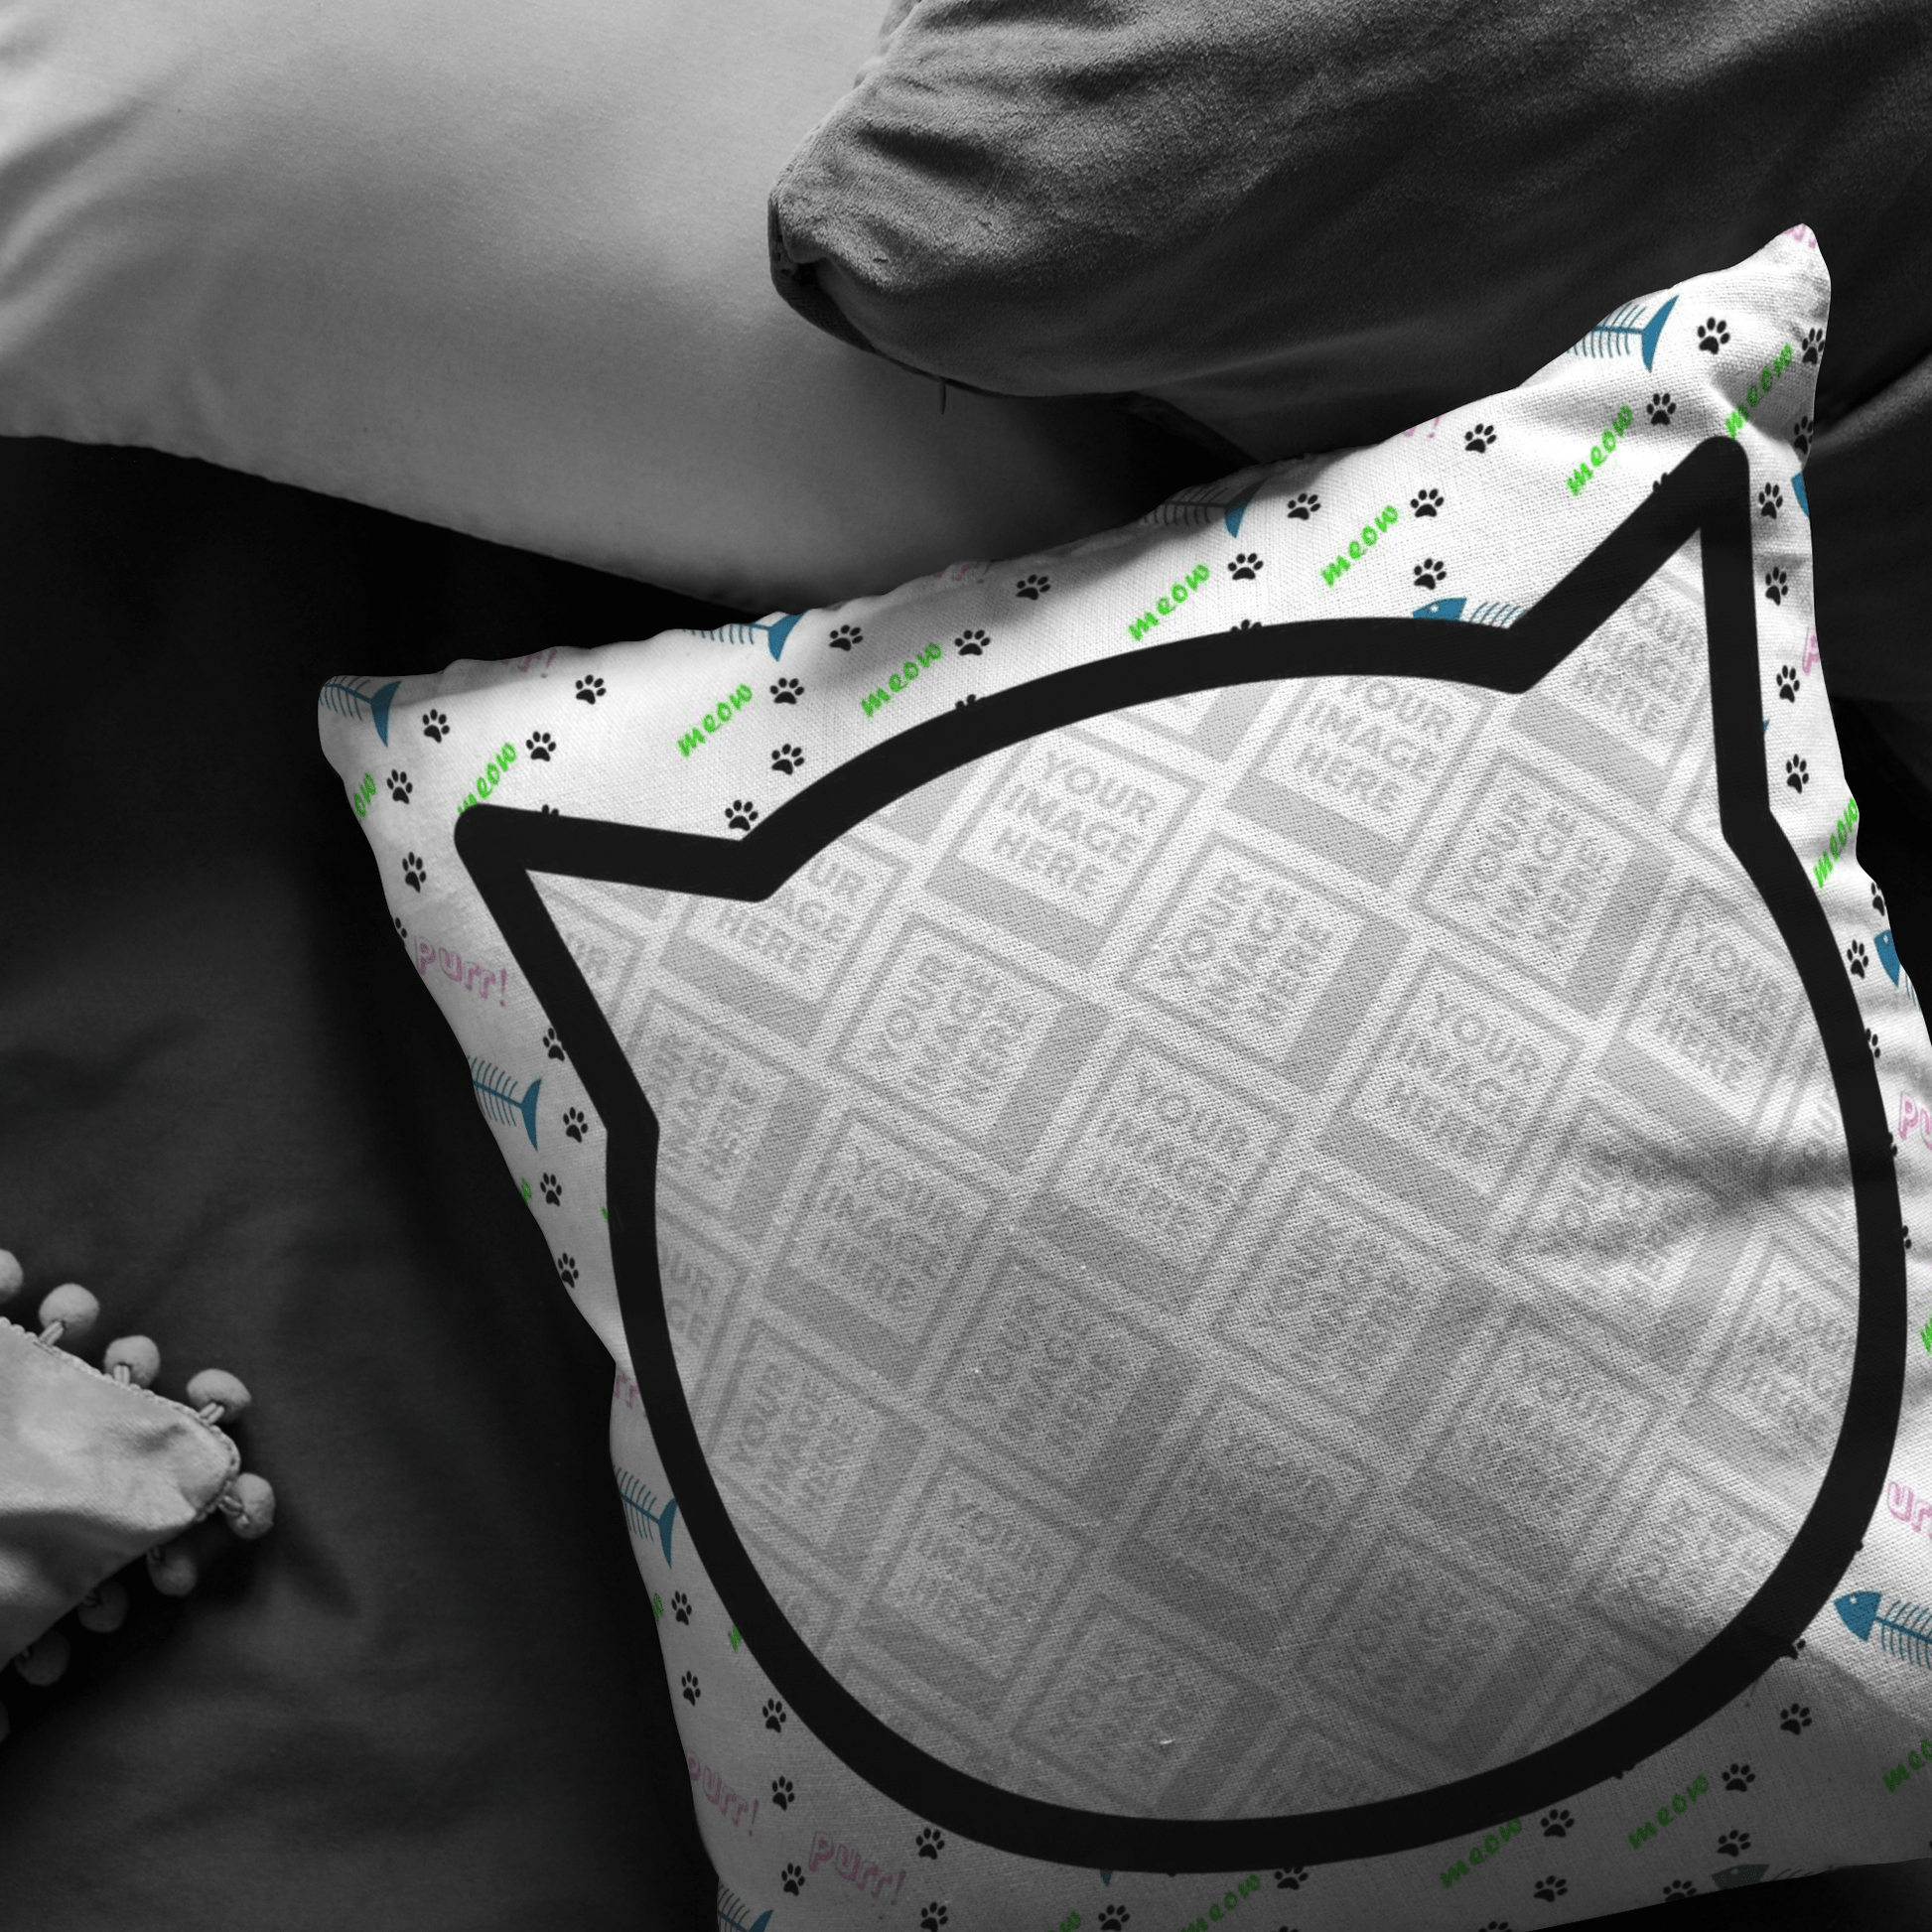 Personalized Cat Pillow - Omtheo Gifts